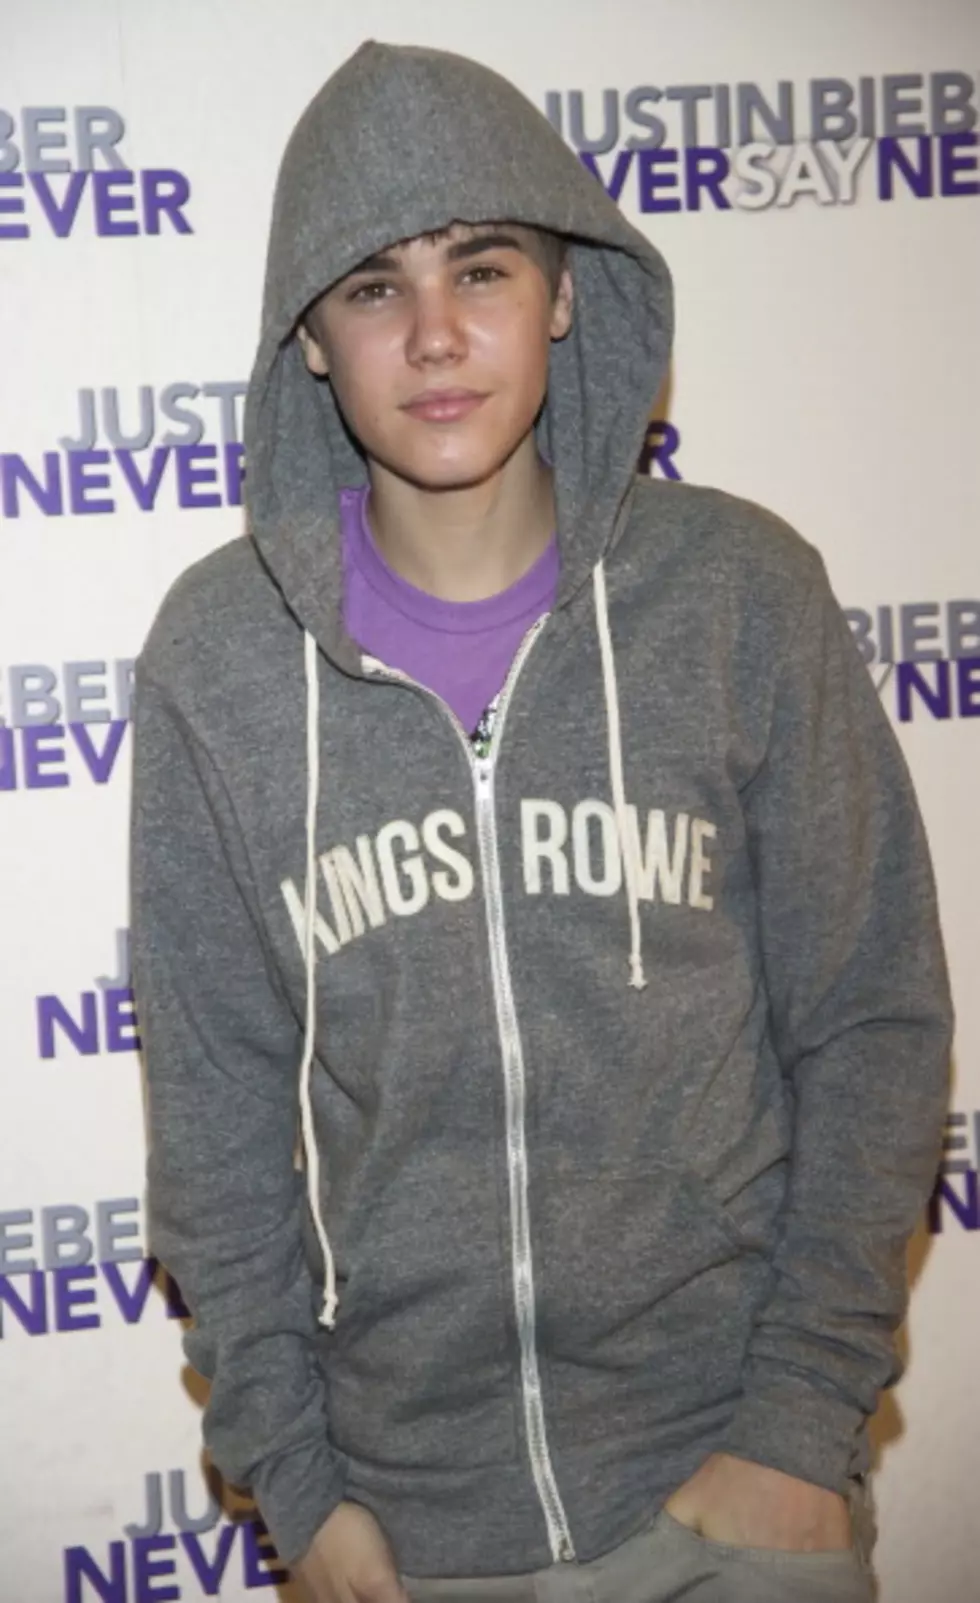 Israeli Prime Minister Cancels Meeting With Biebs